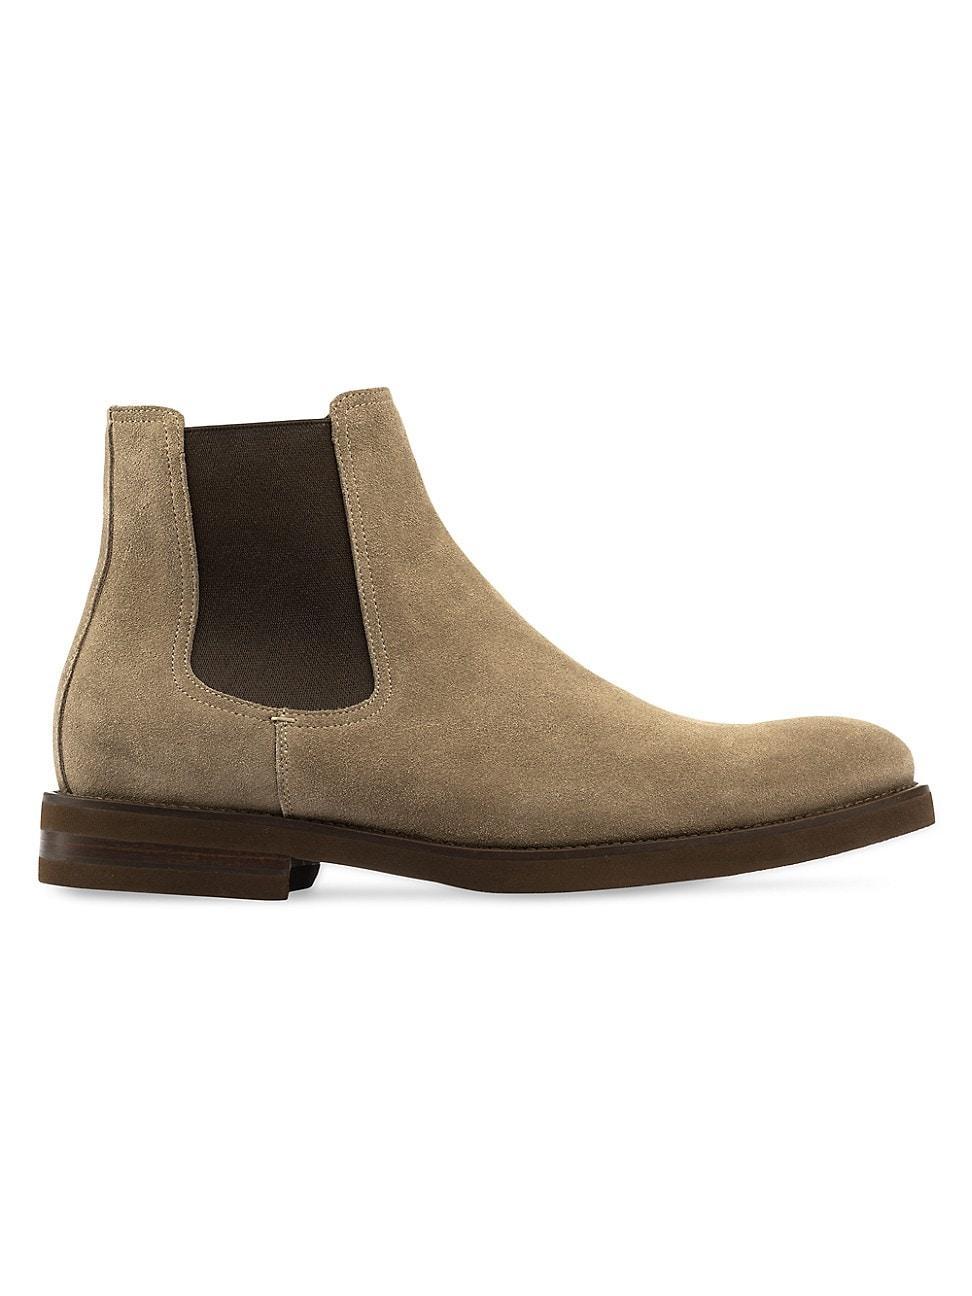 Mens Whitman Suede Chelsea Boots Product Image